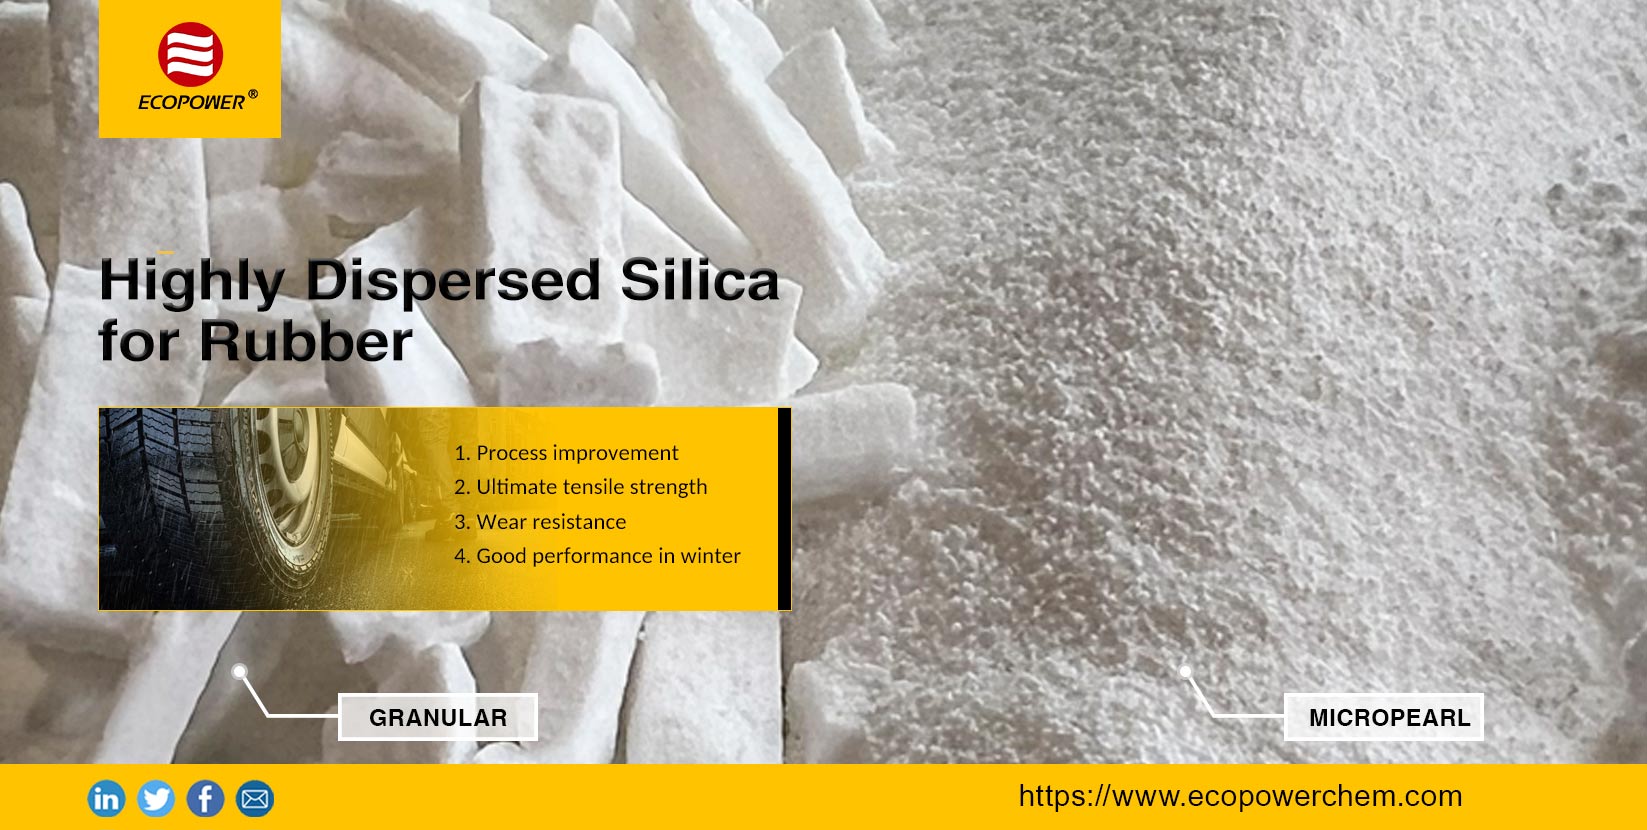 Performance Characteristics of Highly Dispersed Silica - ECOPOWER